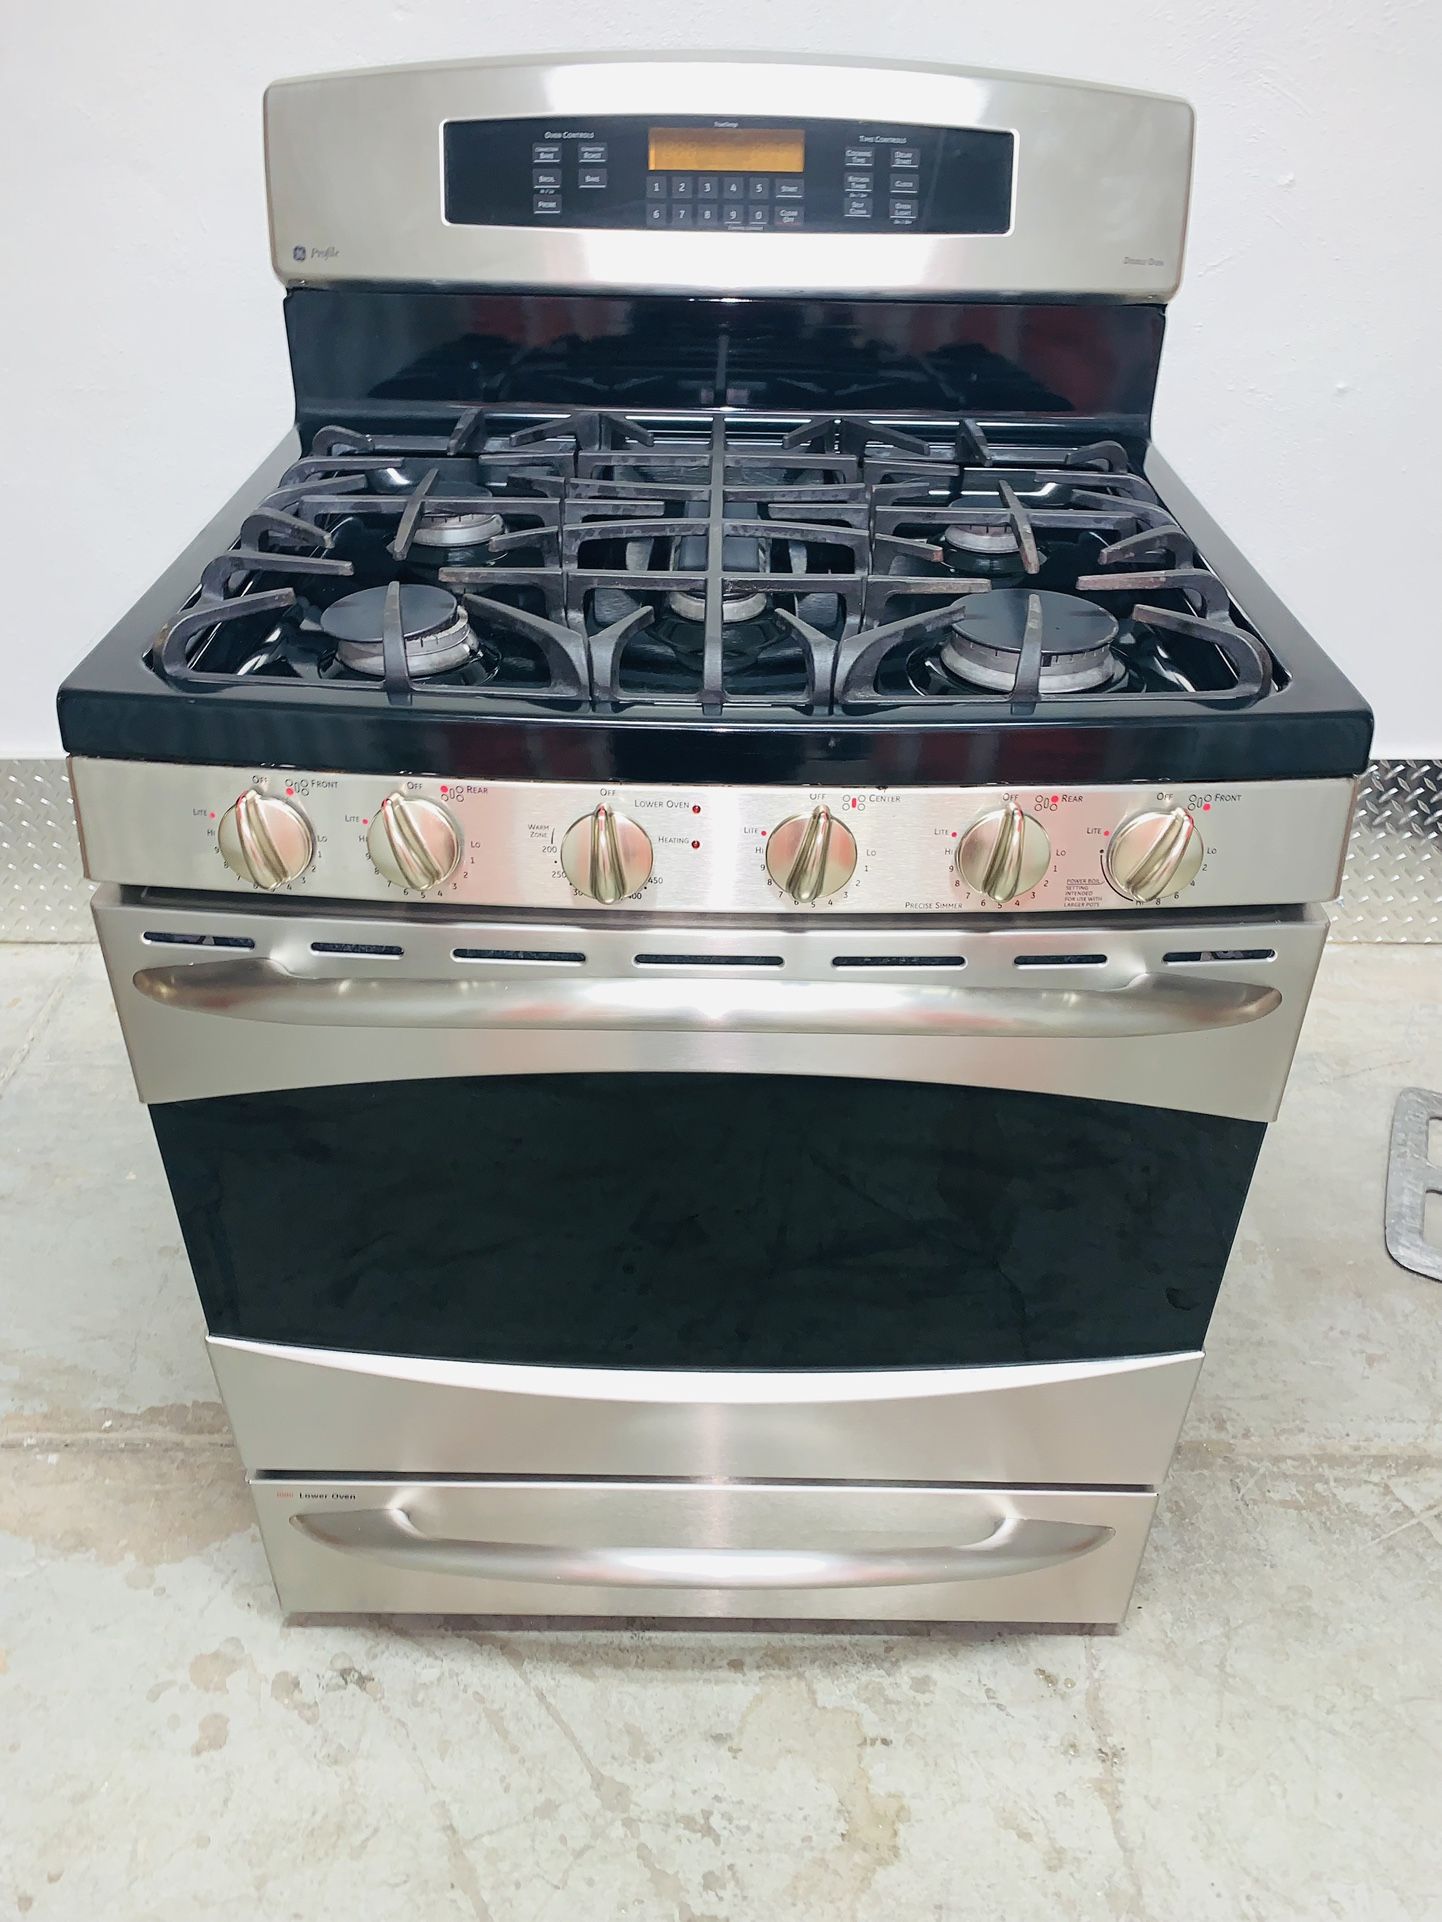 GE gas stove in very perfect condition a receipt for 60 days warranty